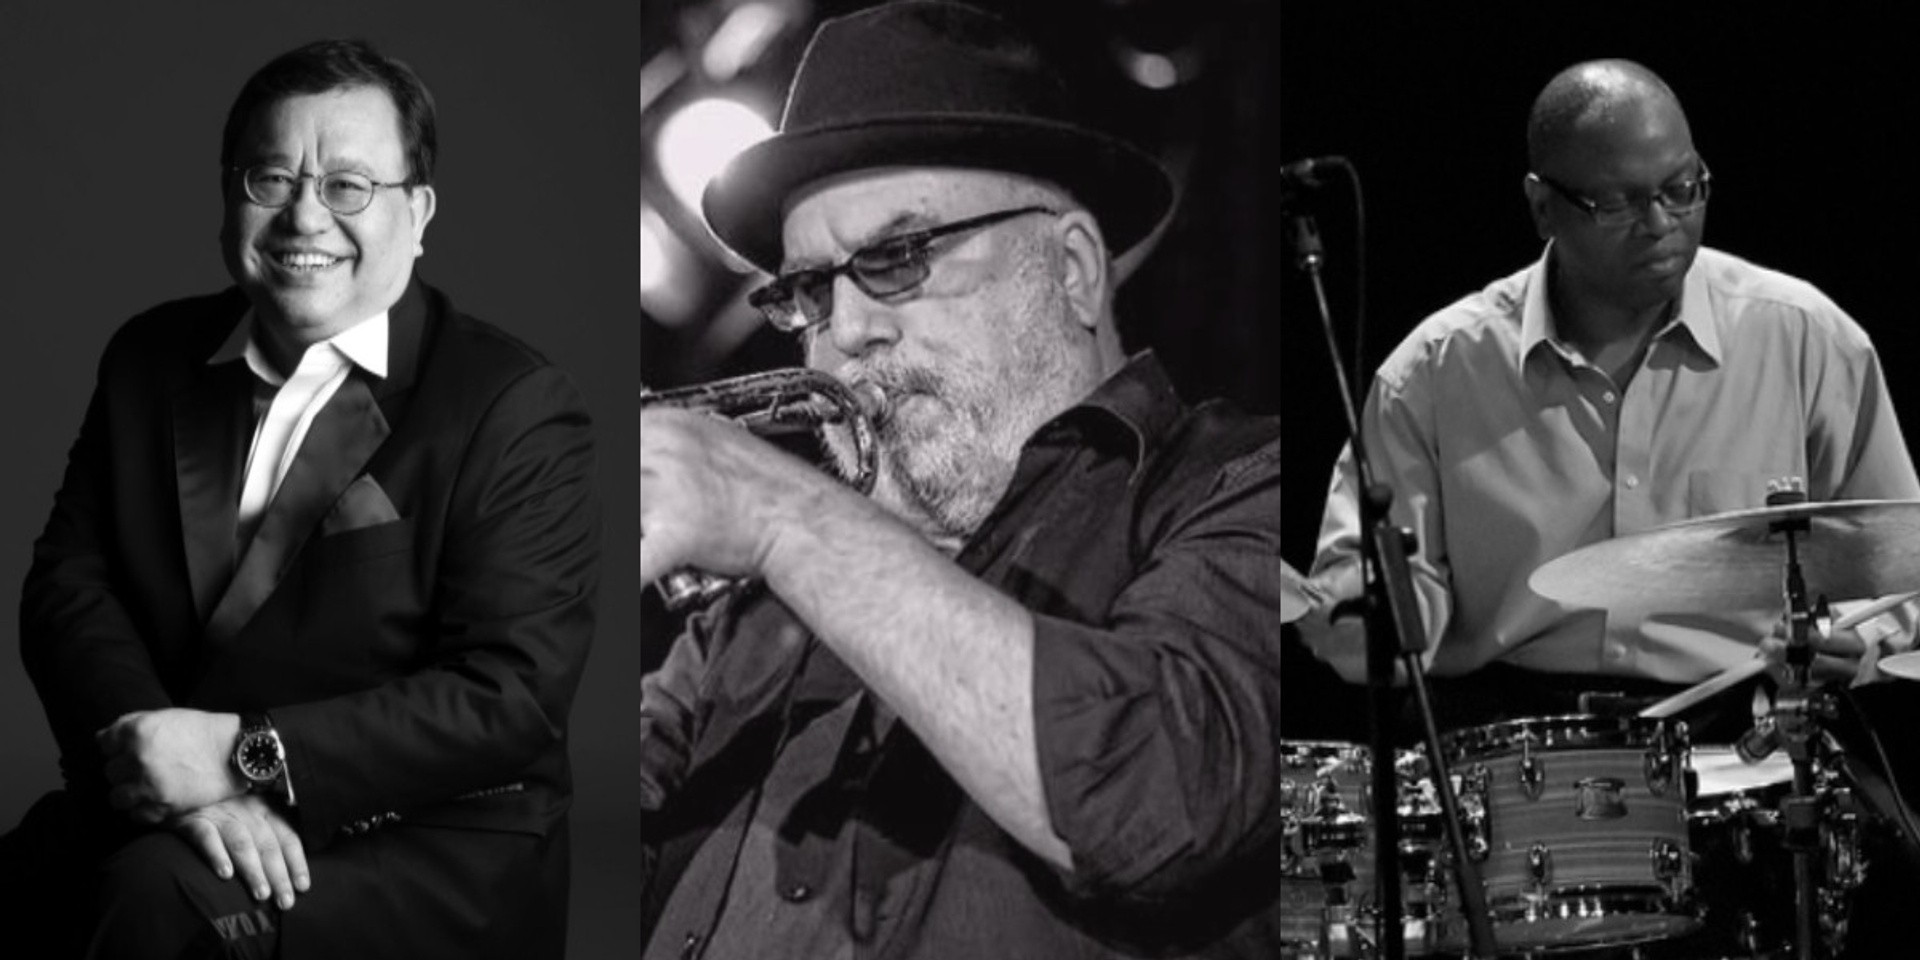 Randy Brecker, Lewis Nash, Jeremy Monteiro and more to perform at Lion City Youth Jazz Festival 2018 finale